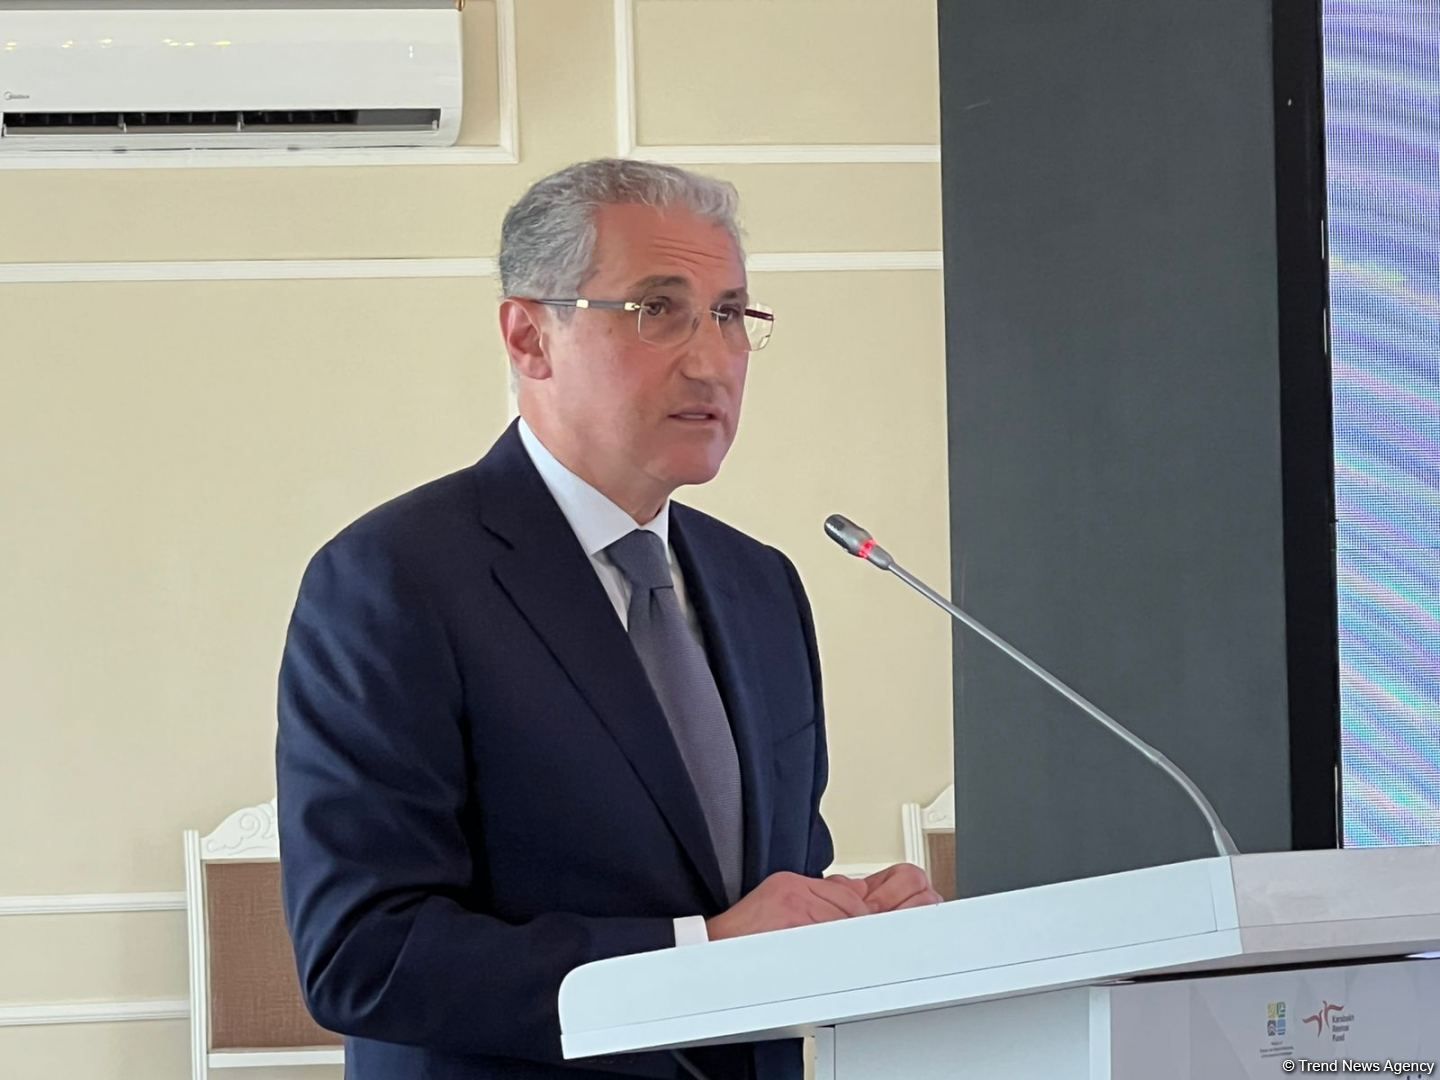 Azerbaijan urges int'l organizations to promote access to UN Water Convention [PHOTO]